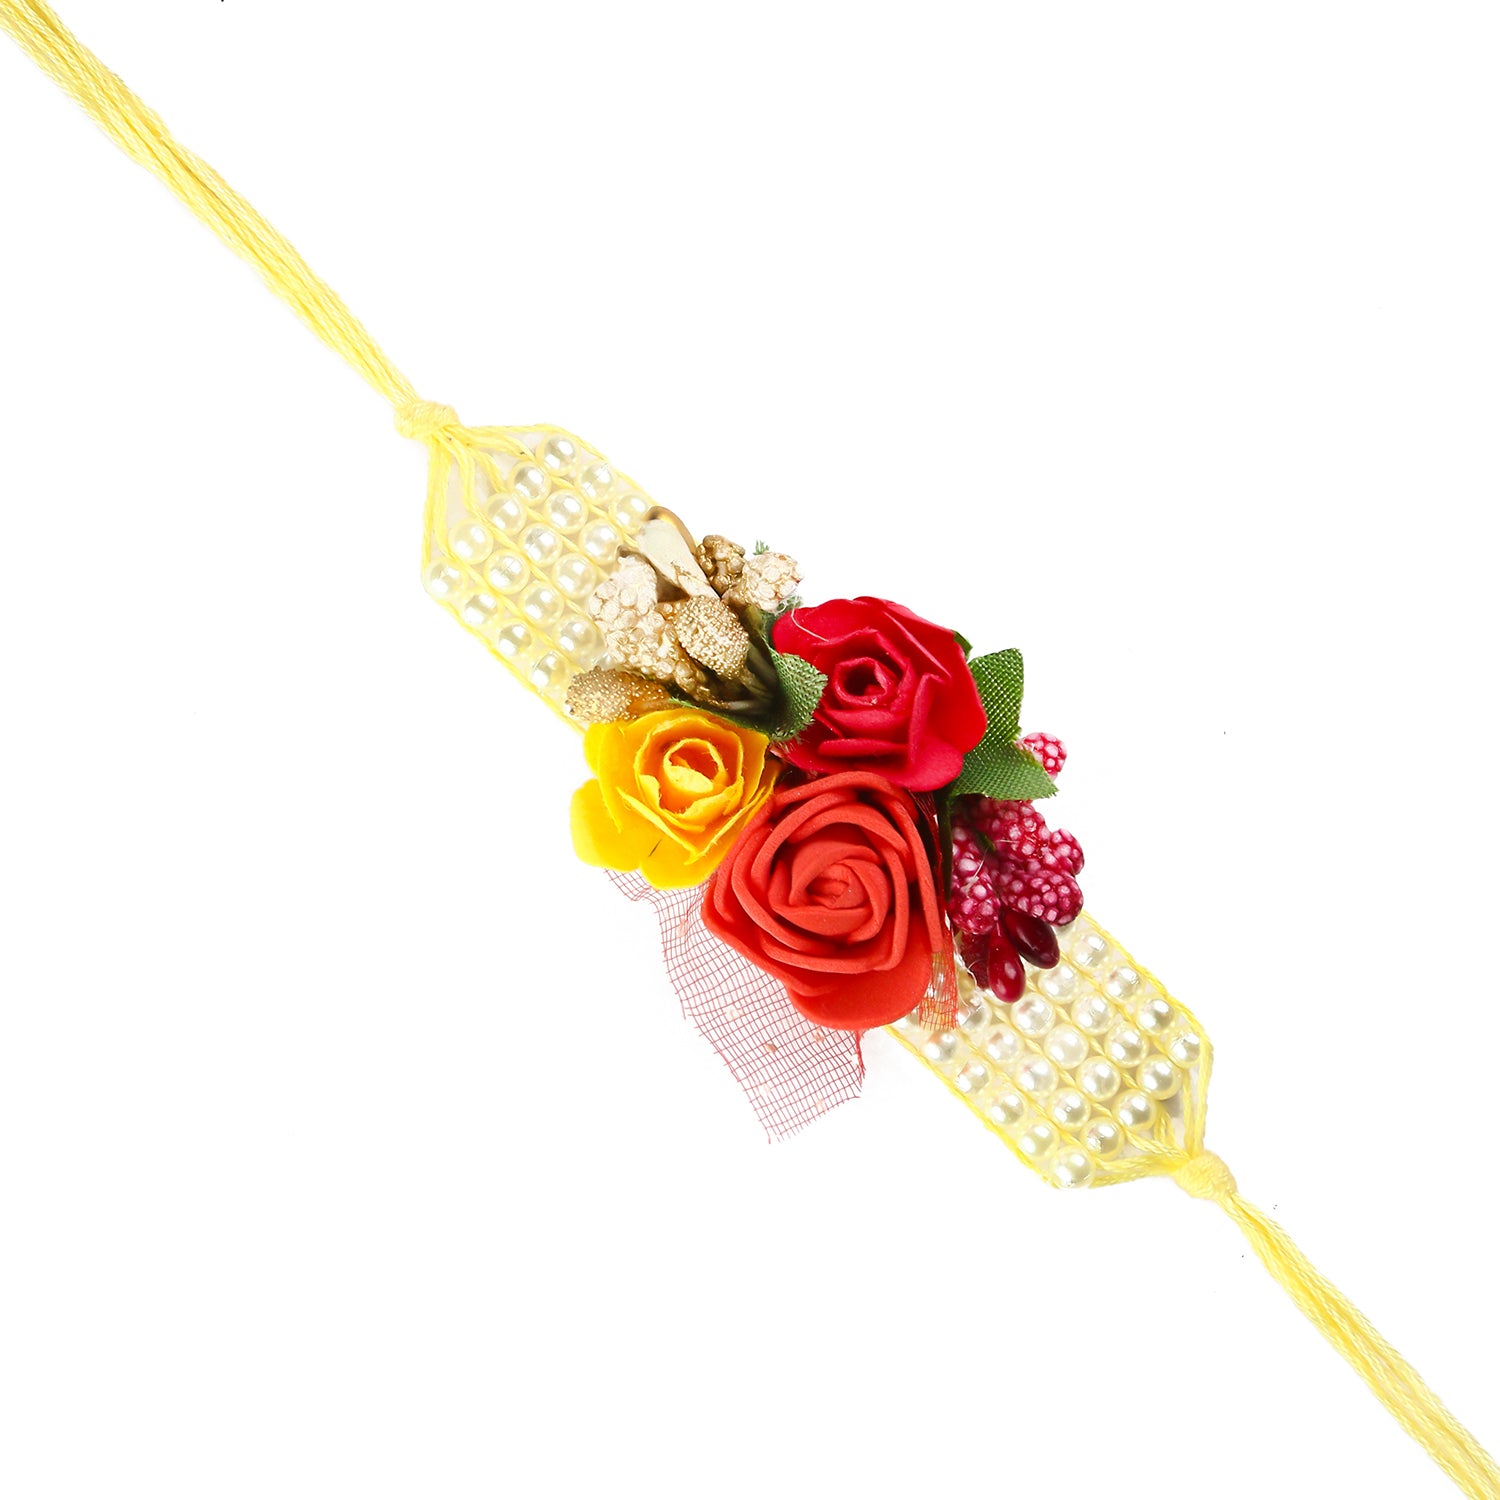 Designer Floral Rakhi with Soan Papdi (500 Gm) and Roli Chawal Pack, Best Wishes Greeting Card 1